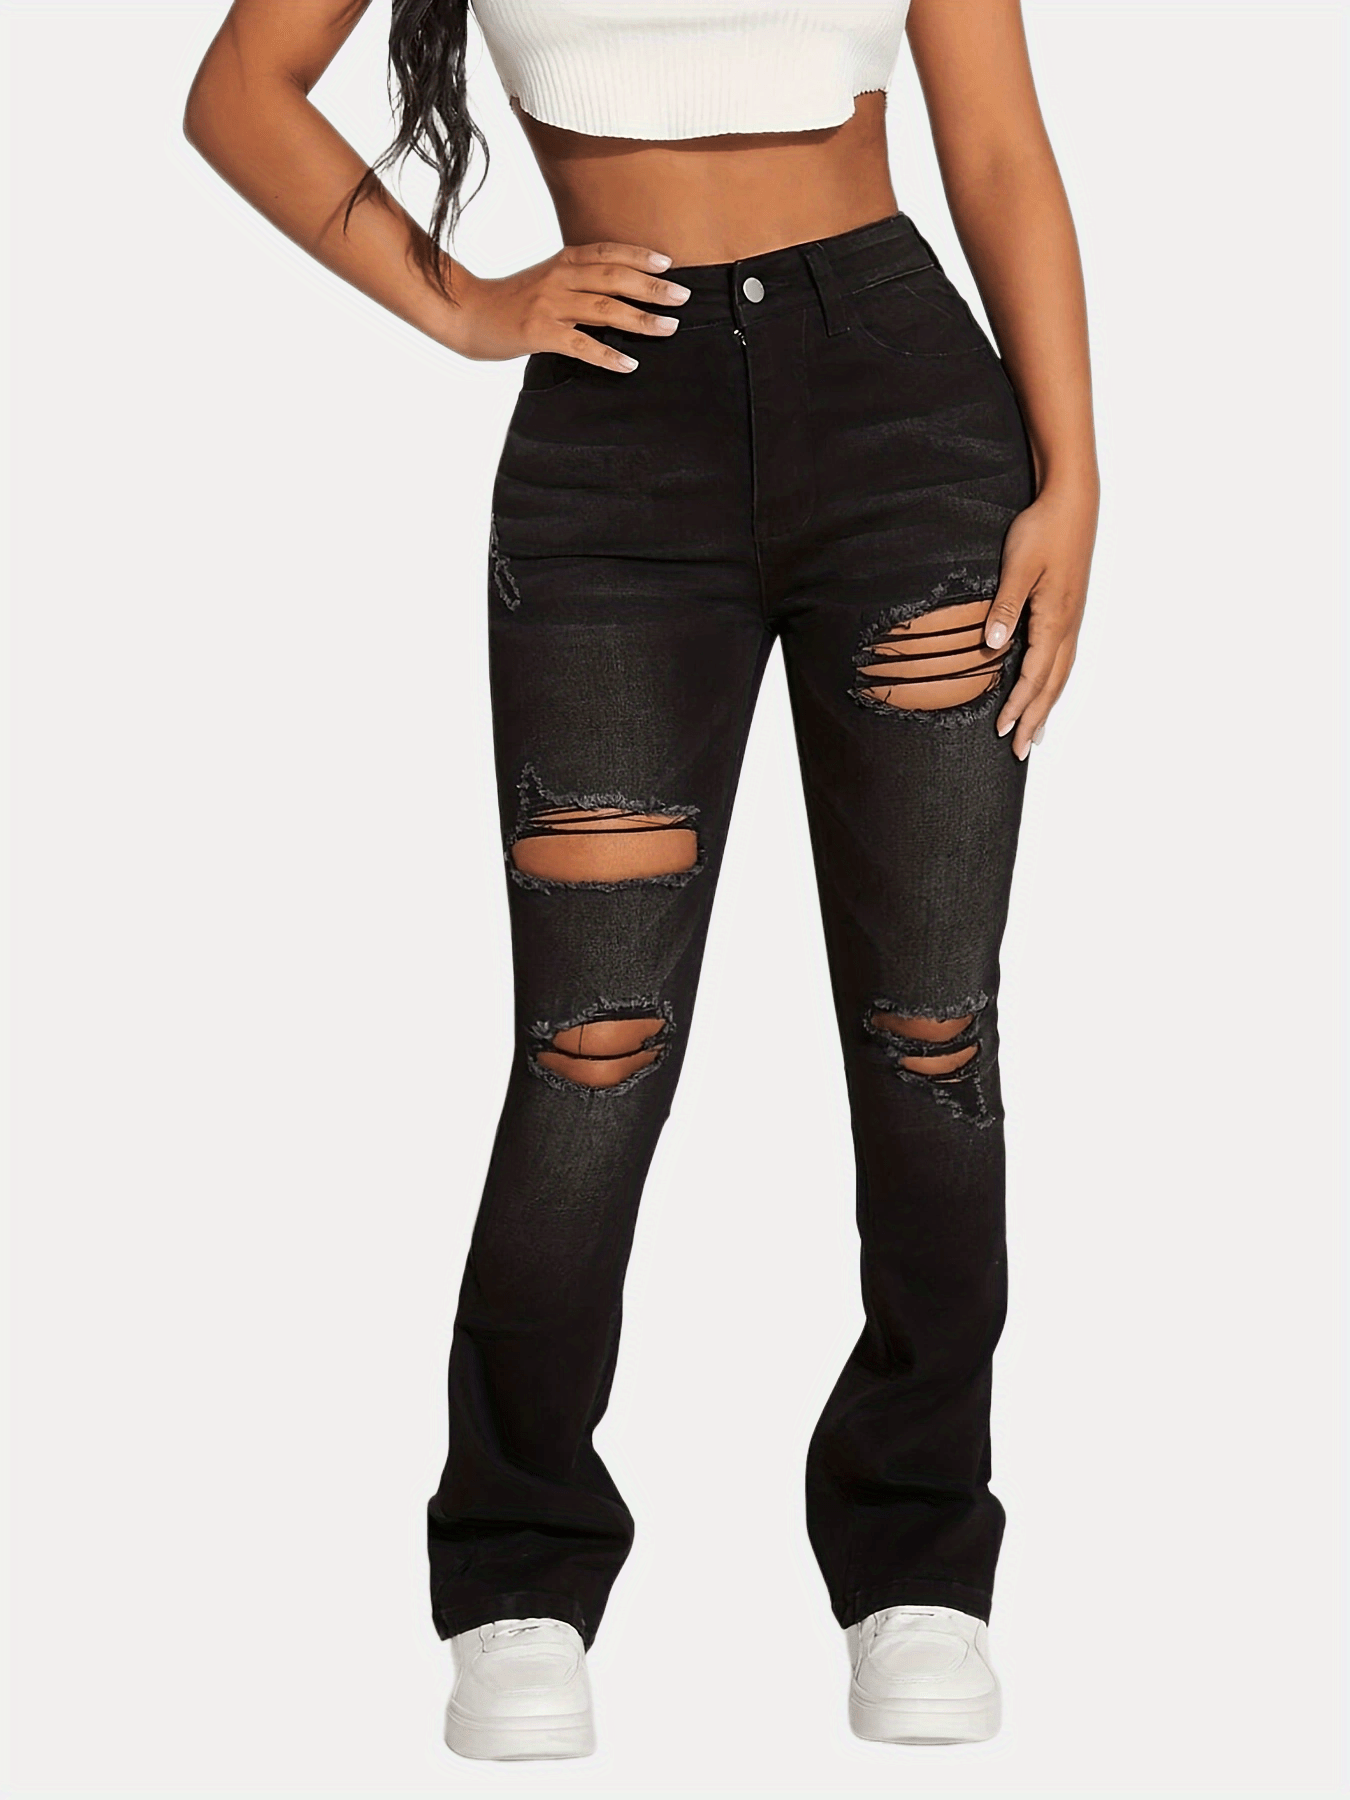 Ripped One Leg High * Brown Jeans, Bell Bottom Shape Distressed Flare  Jeans, Women's Denim & Clothing